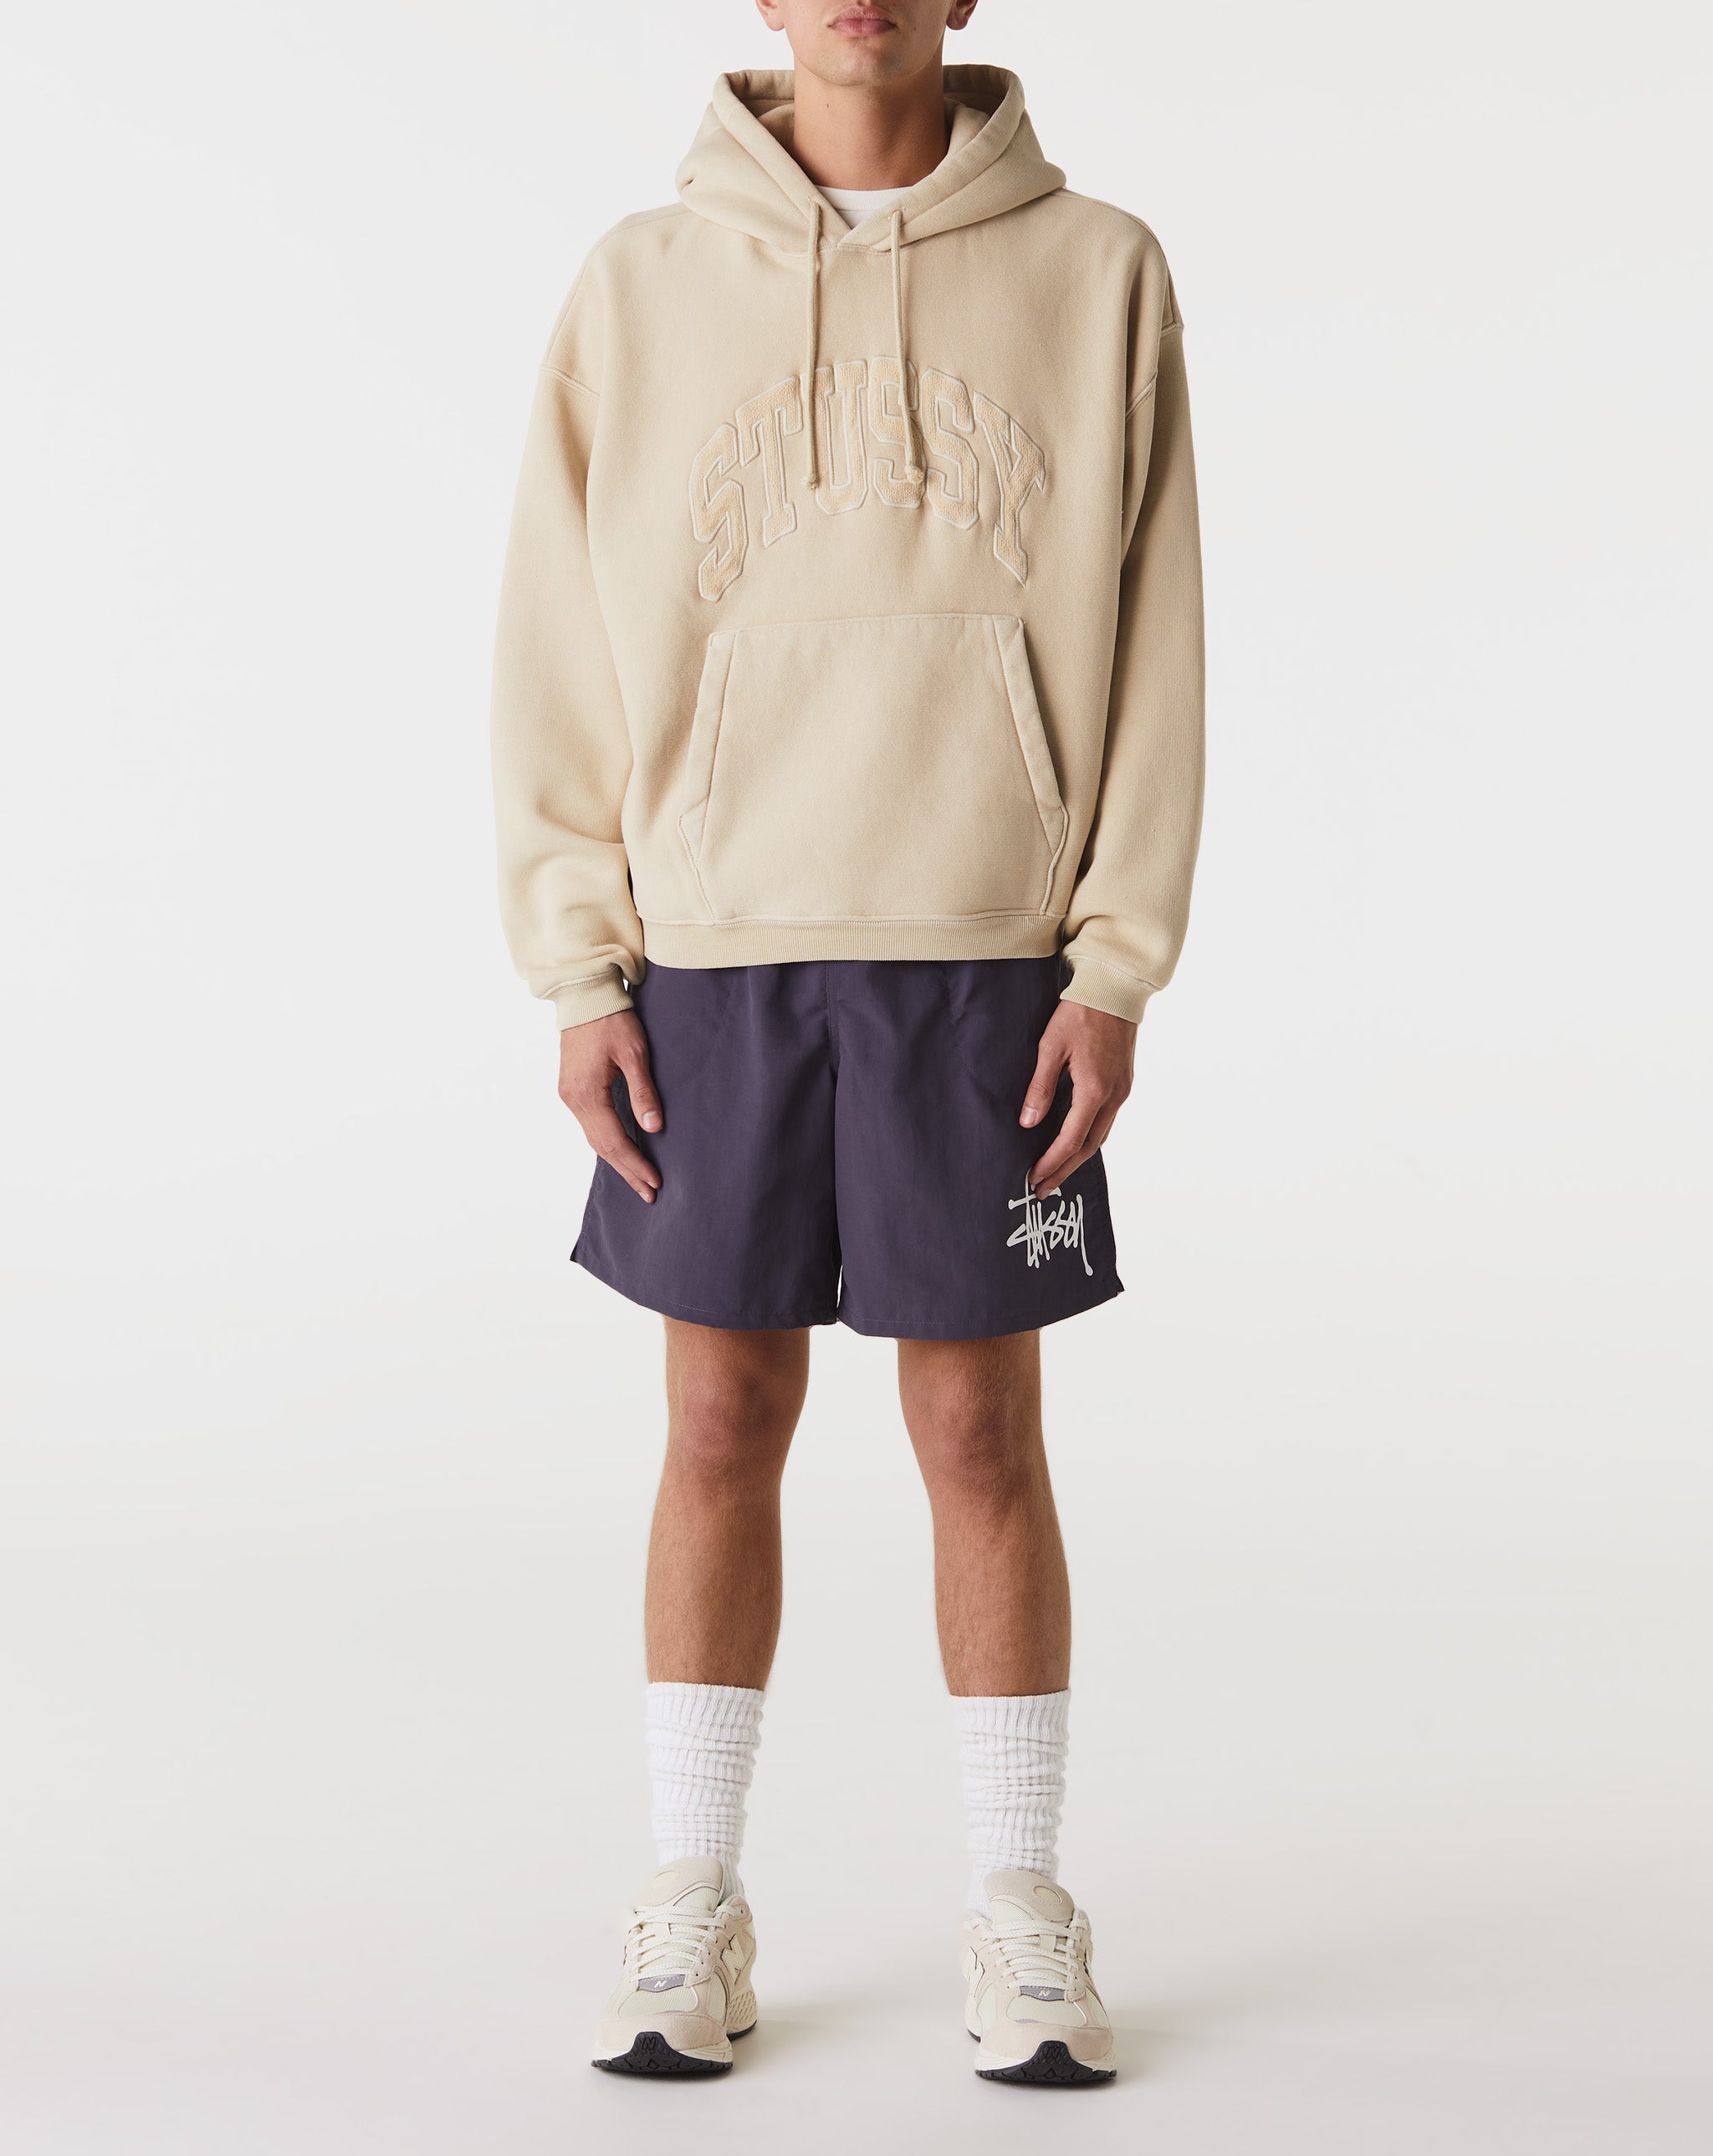 Stüssy Lounge in luxury in these blue sweat Classic shorts from  - Cheap Cerbe Jordan outlet